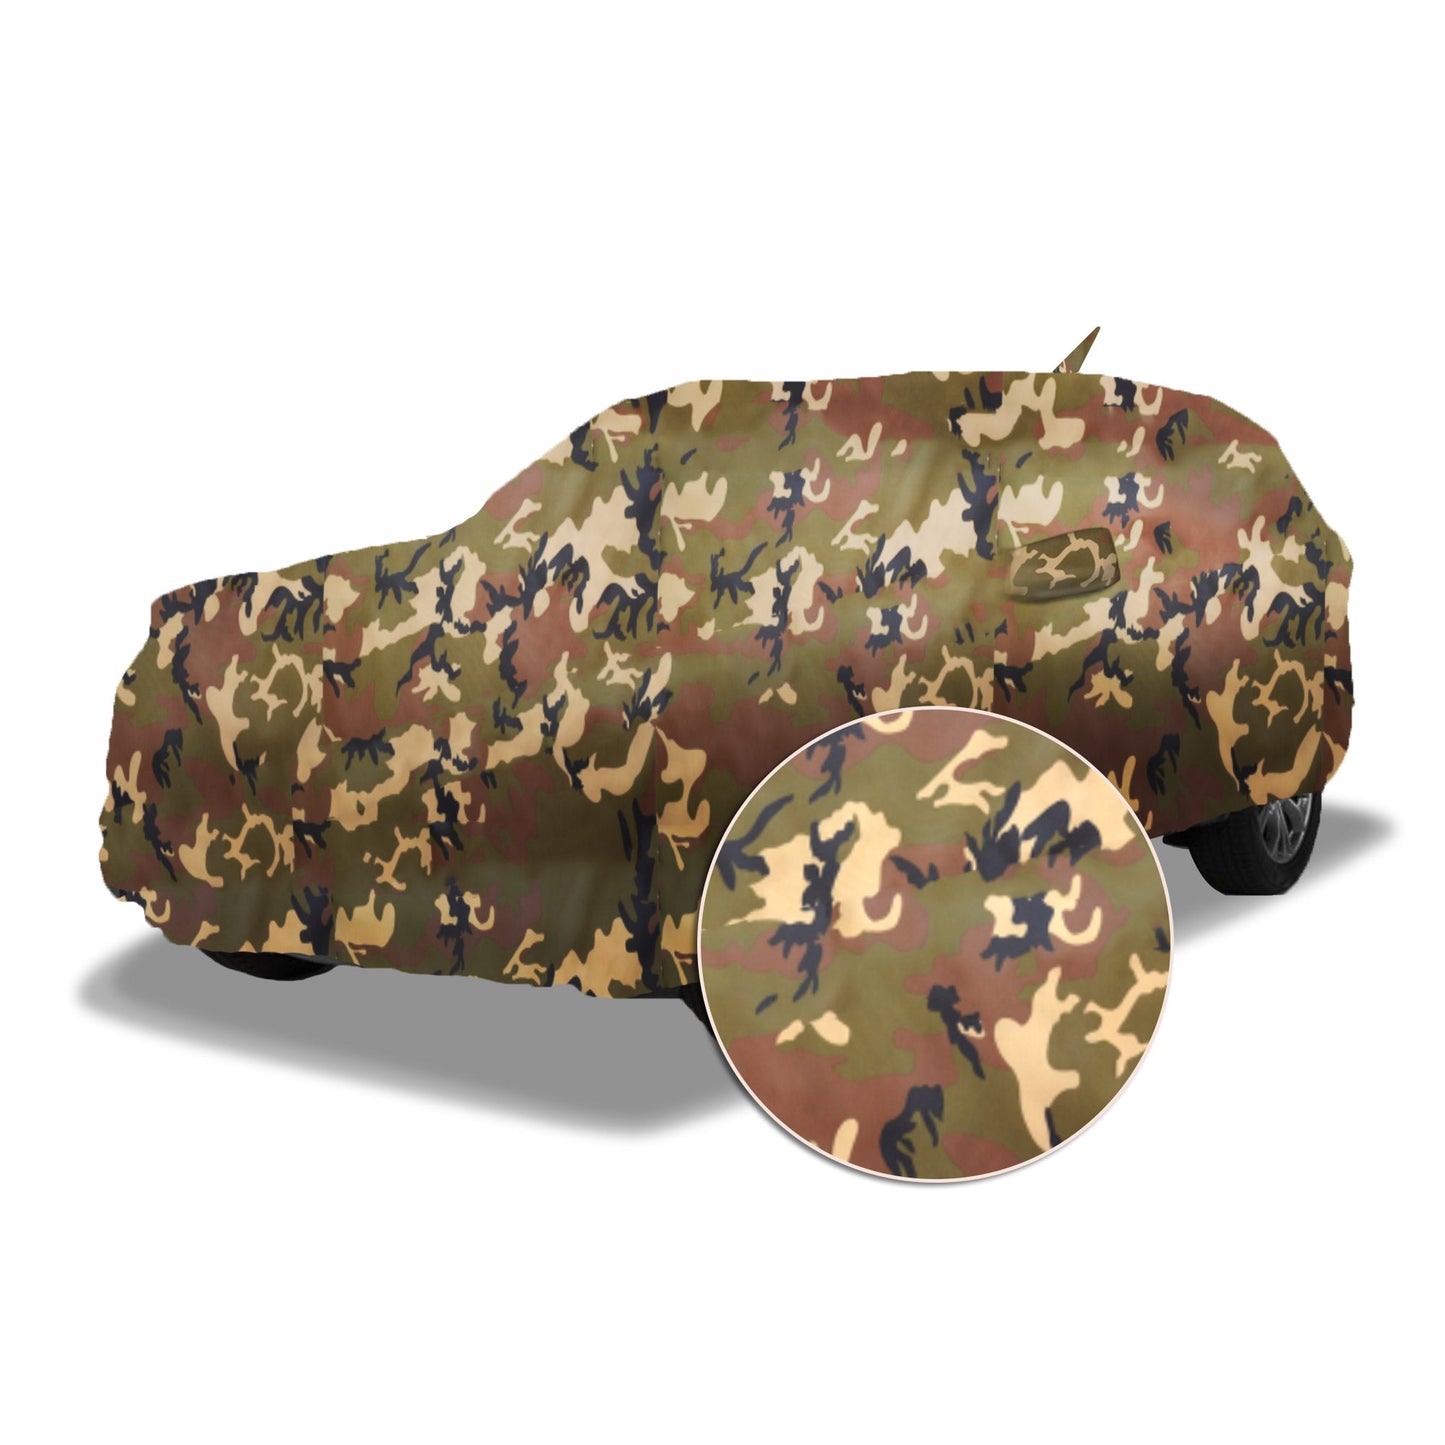 Ascot Skoda Fabia 2007-2014 Model Car Body Cover Extra Strong & Dust Proof Jungle Military Car Cover with UV Proof & Water-Resistant Coating